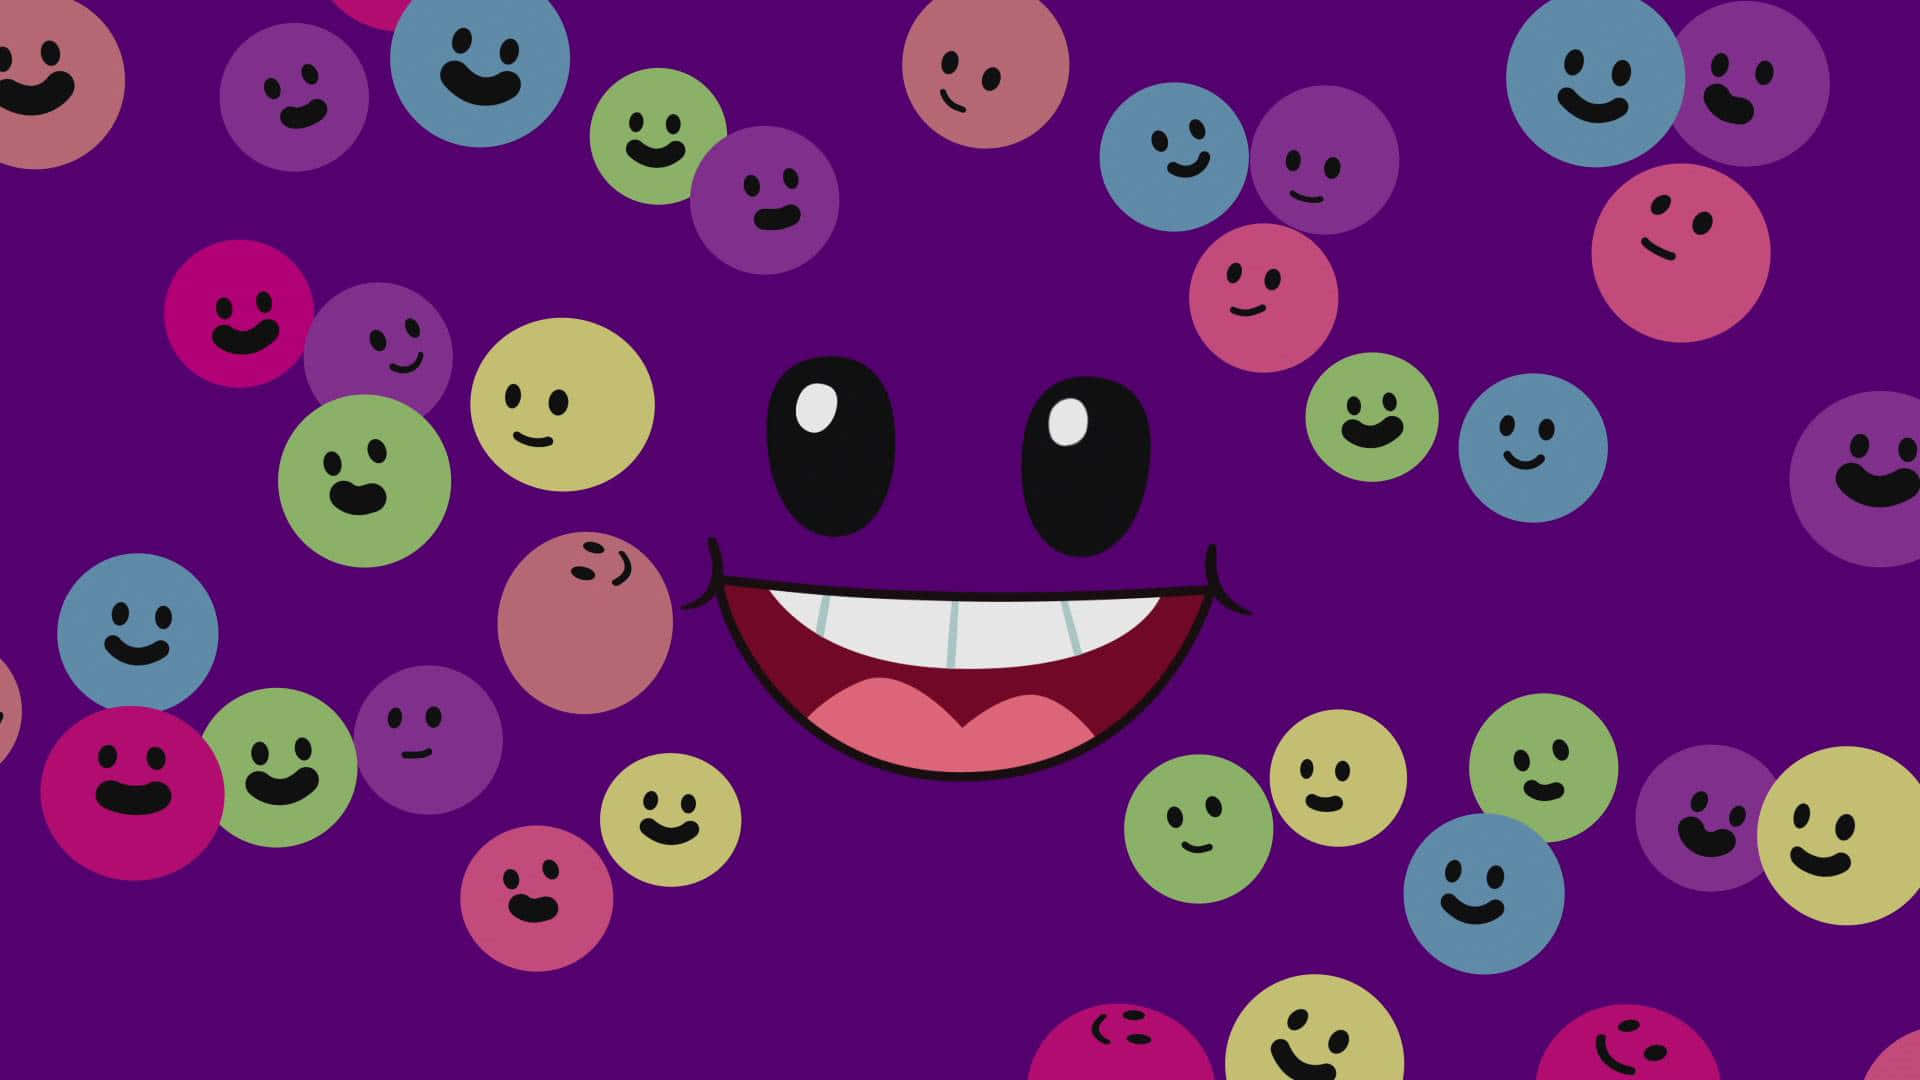 Colorful Smiley Faces Purple Background Wallpaper